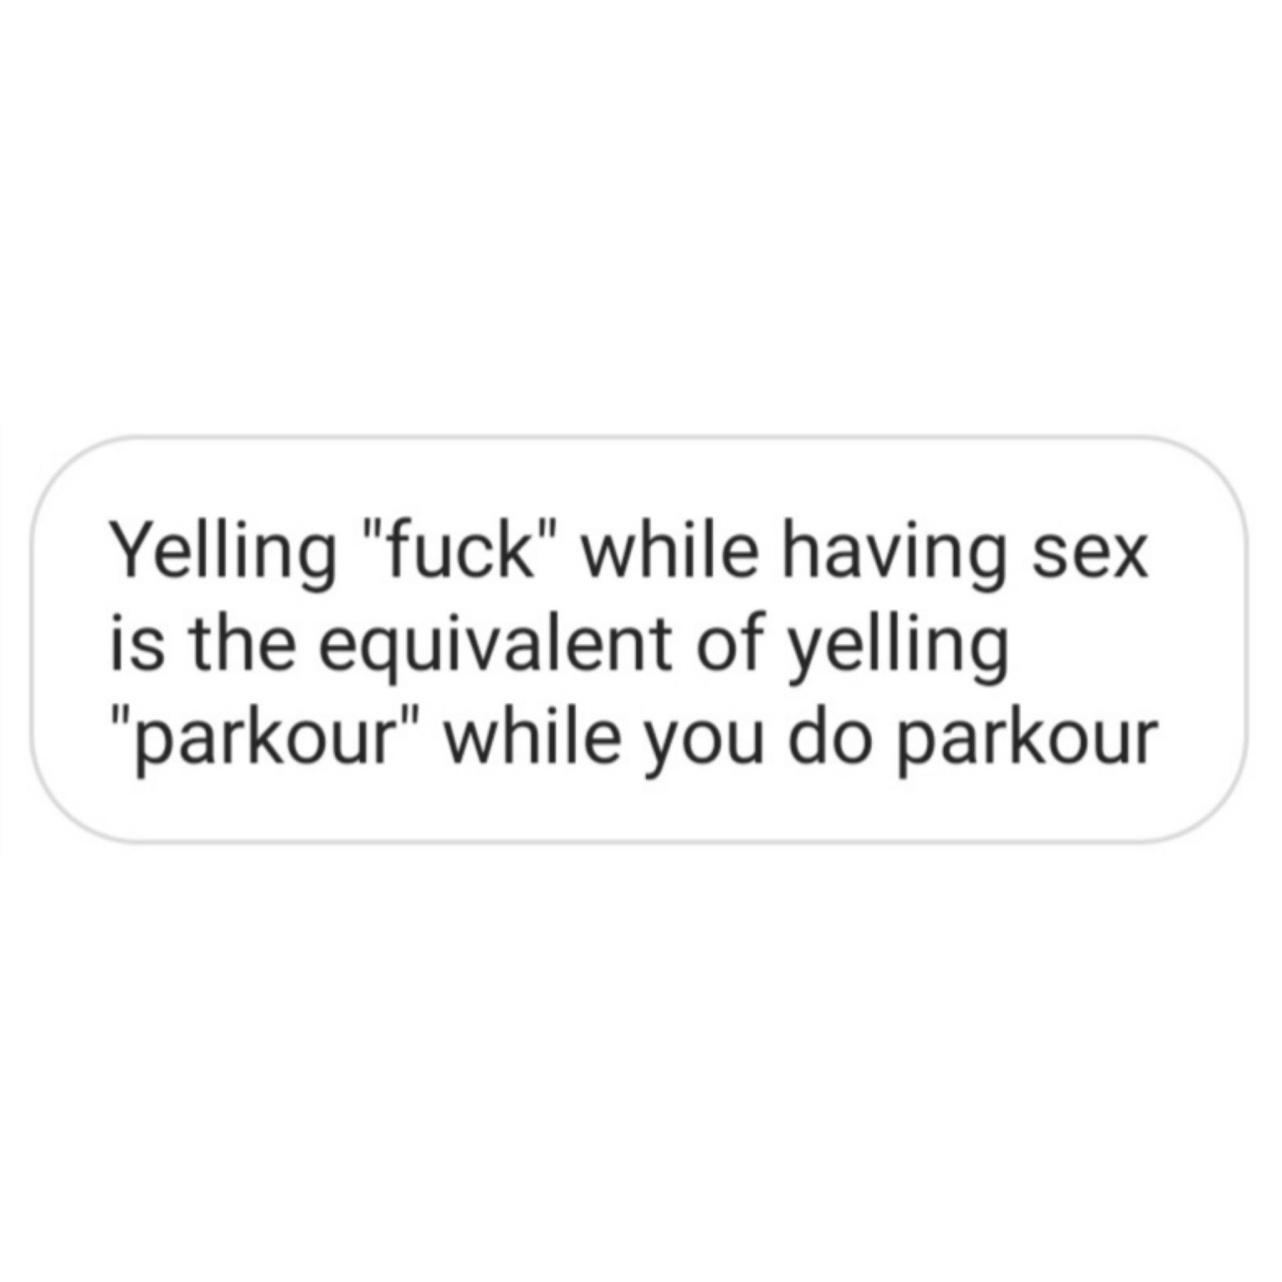 hate my self - Yelling "fuck" while having sex is the equivalent of yelling "parkour" while you do parkour